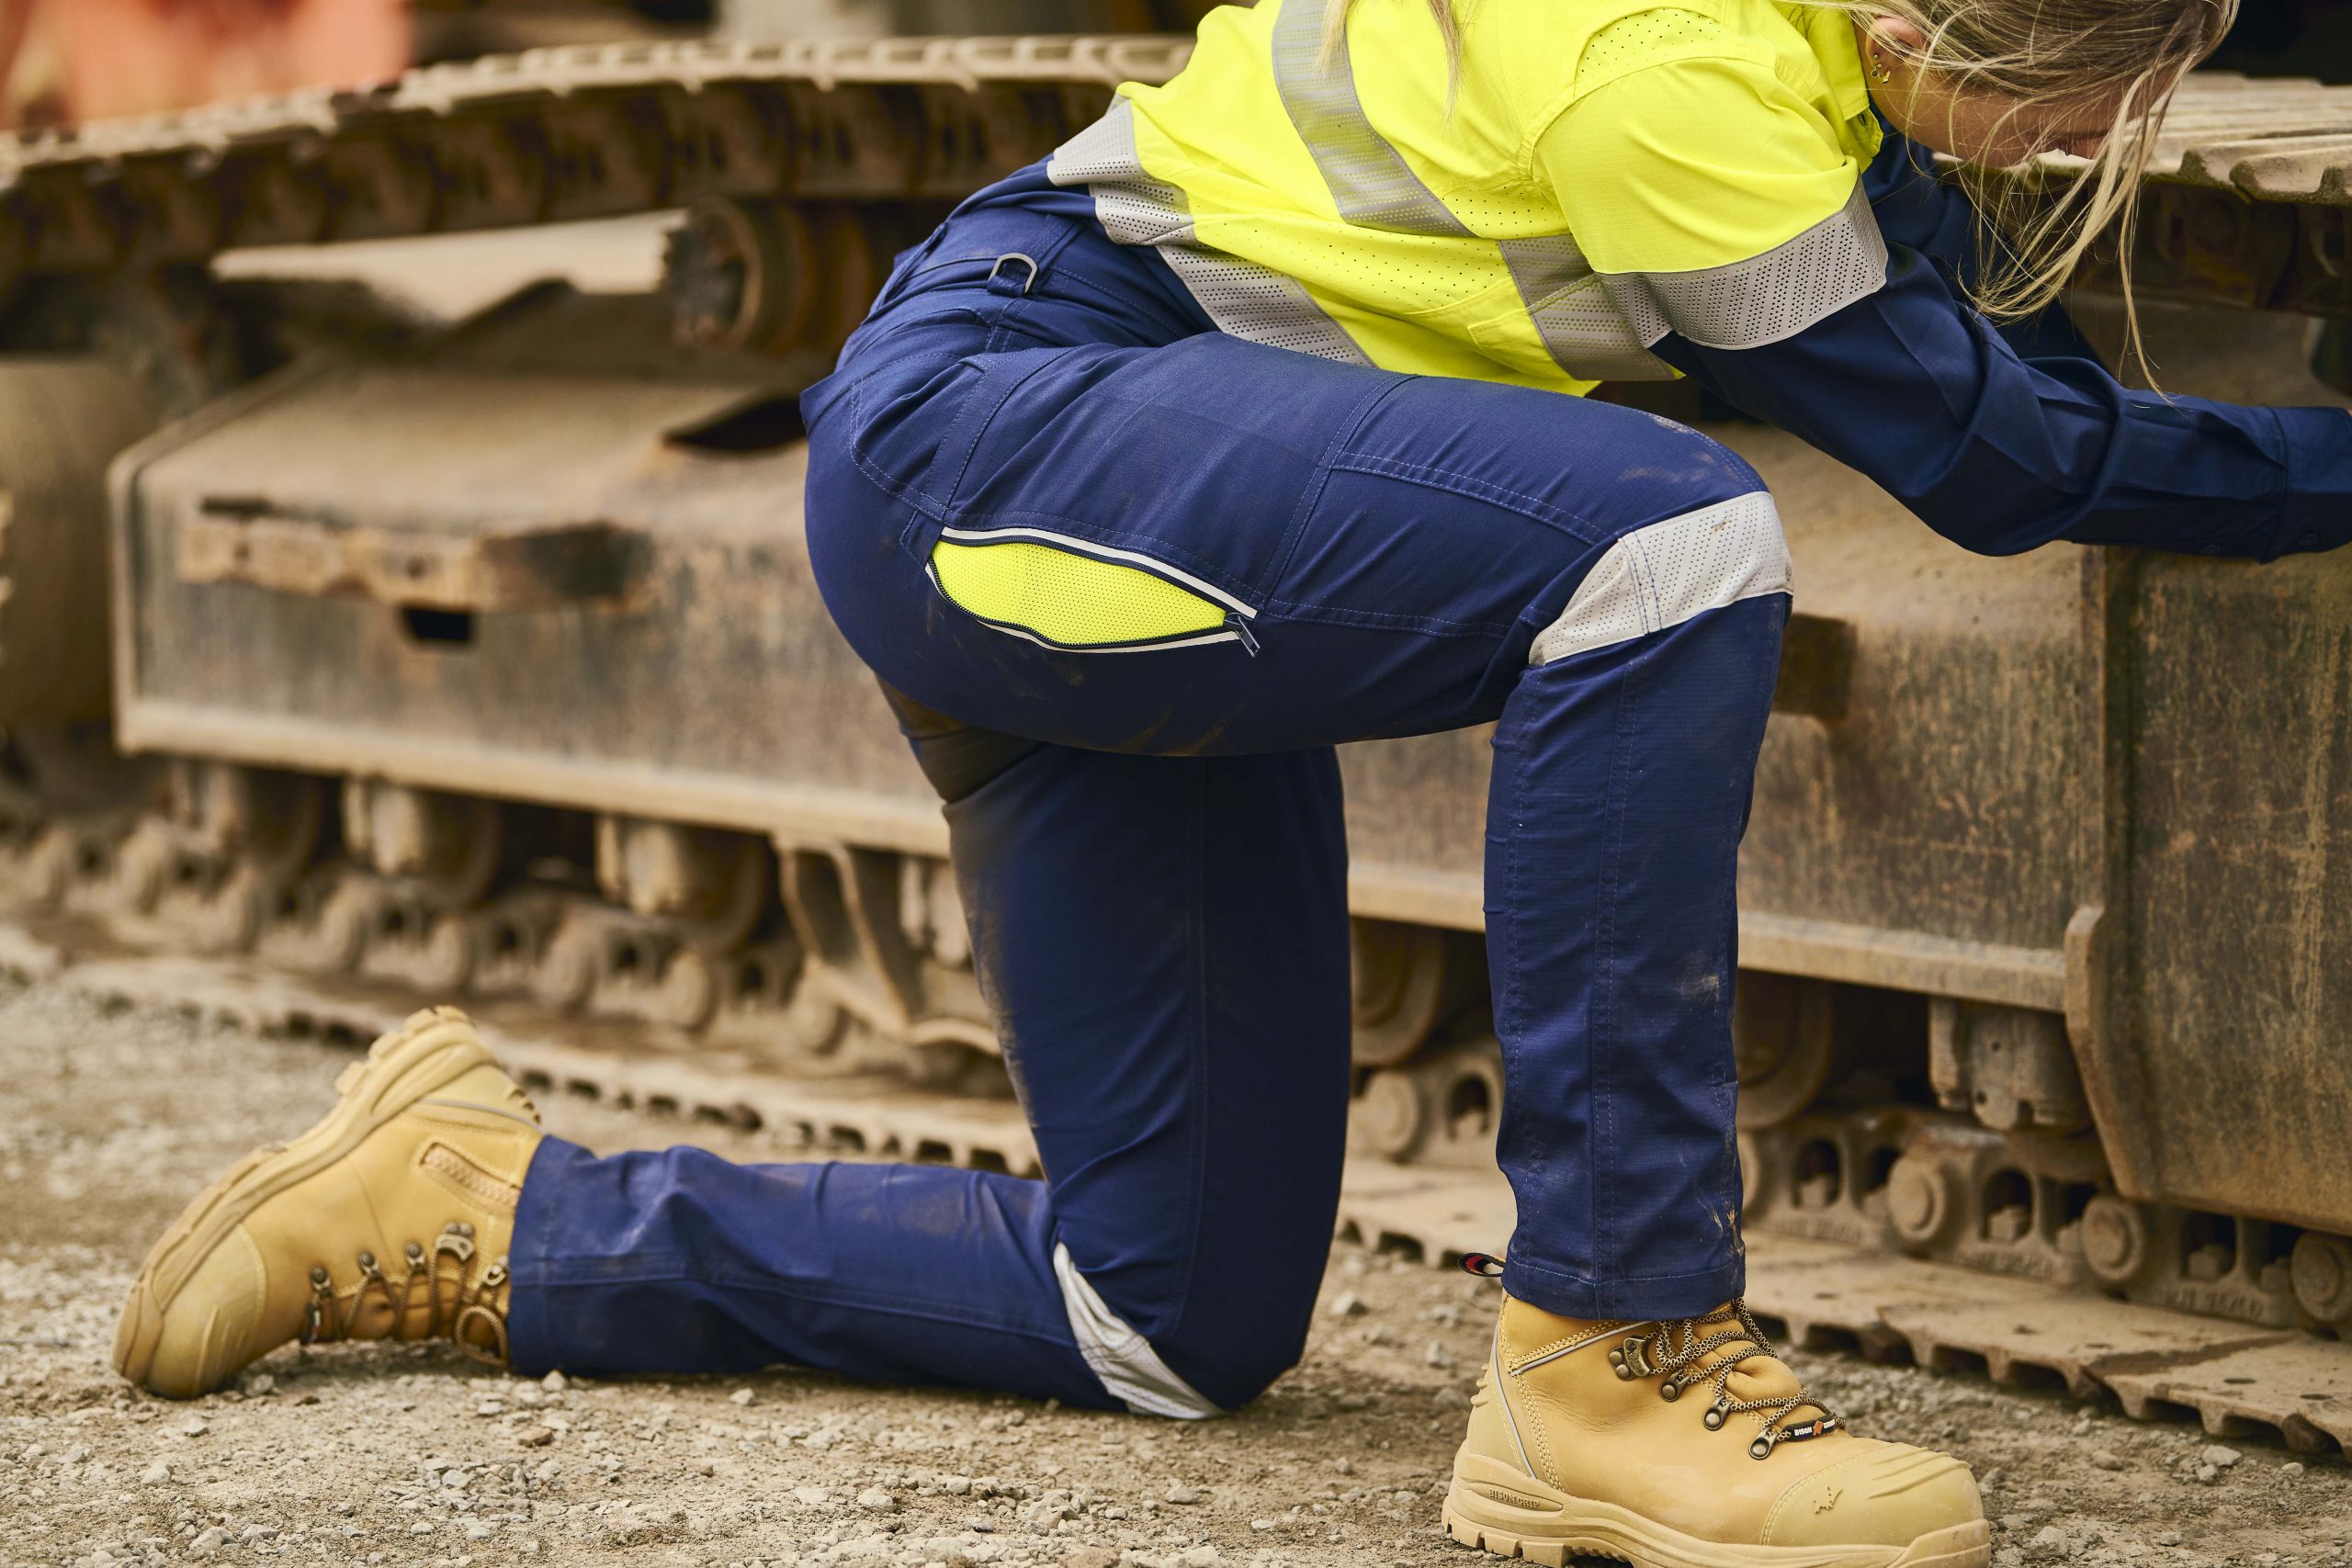 Women's Tradie Work Pants come in a variety of styles with durability, functionality and comfortability.